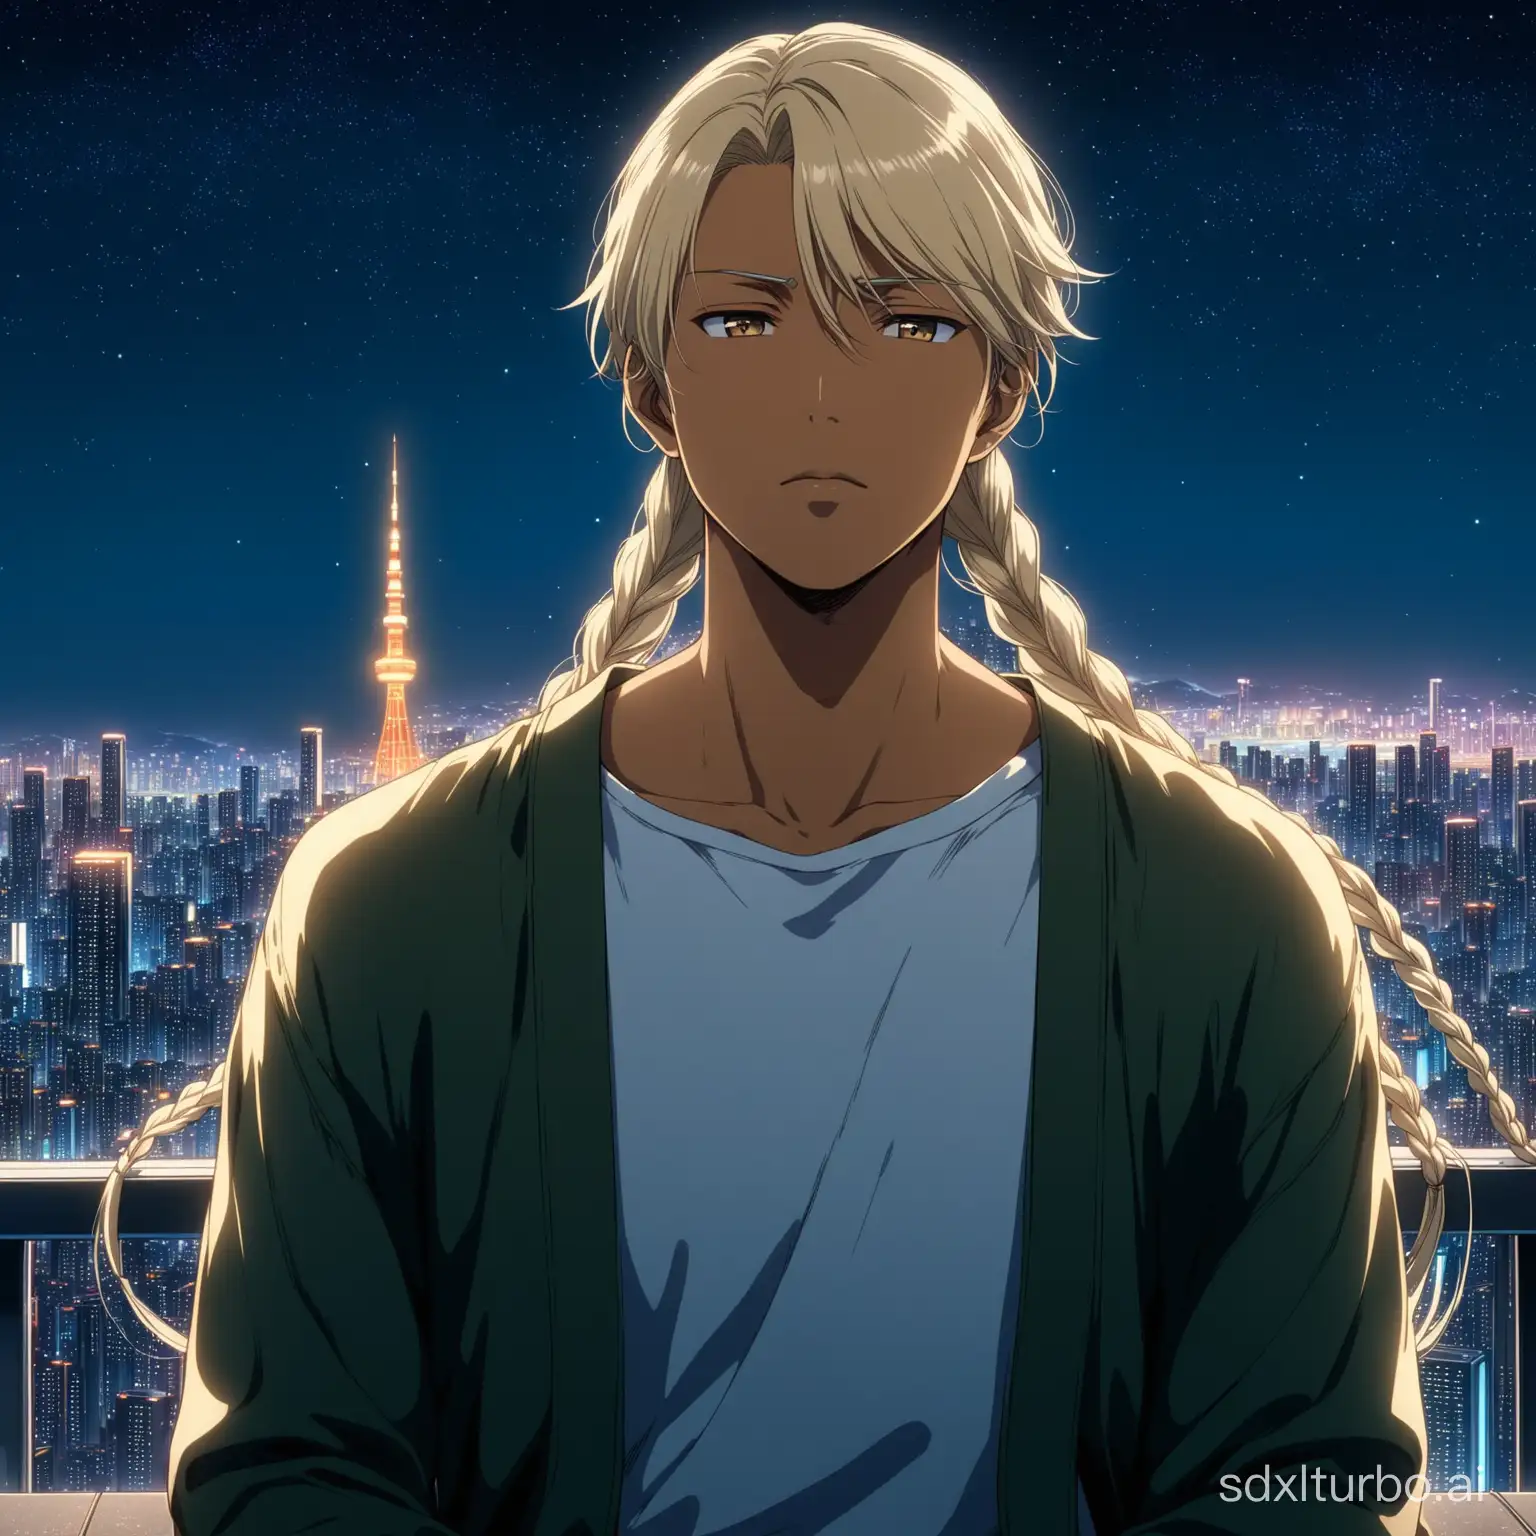 Handsome-Japanese-Man-Meditating-in-SciFi-Cityscape-at-Night-Anime-Key-Visual